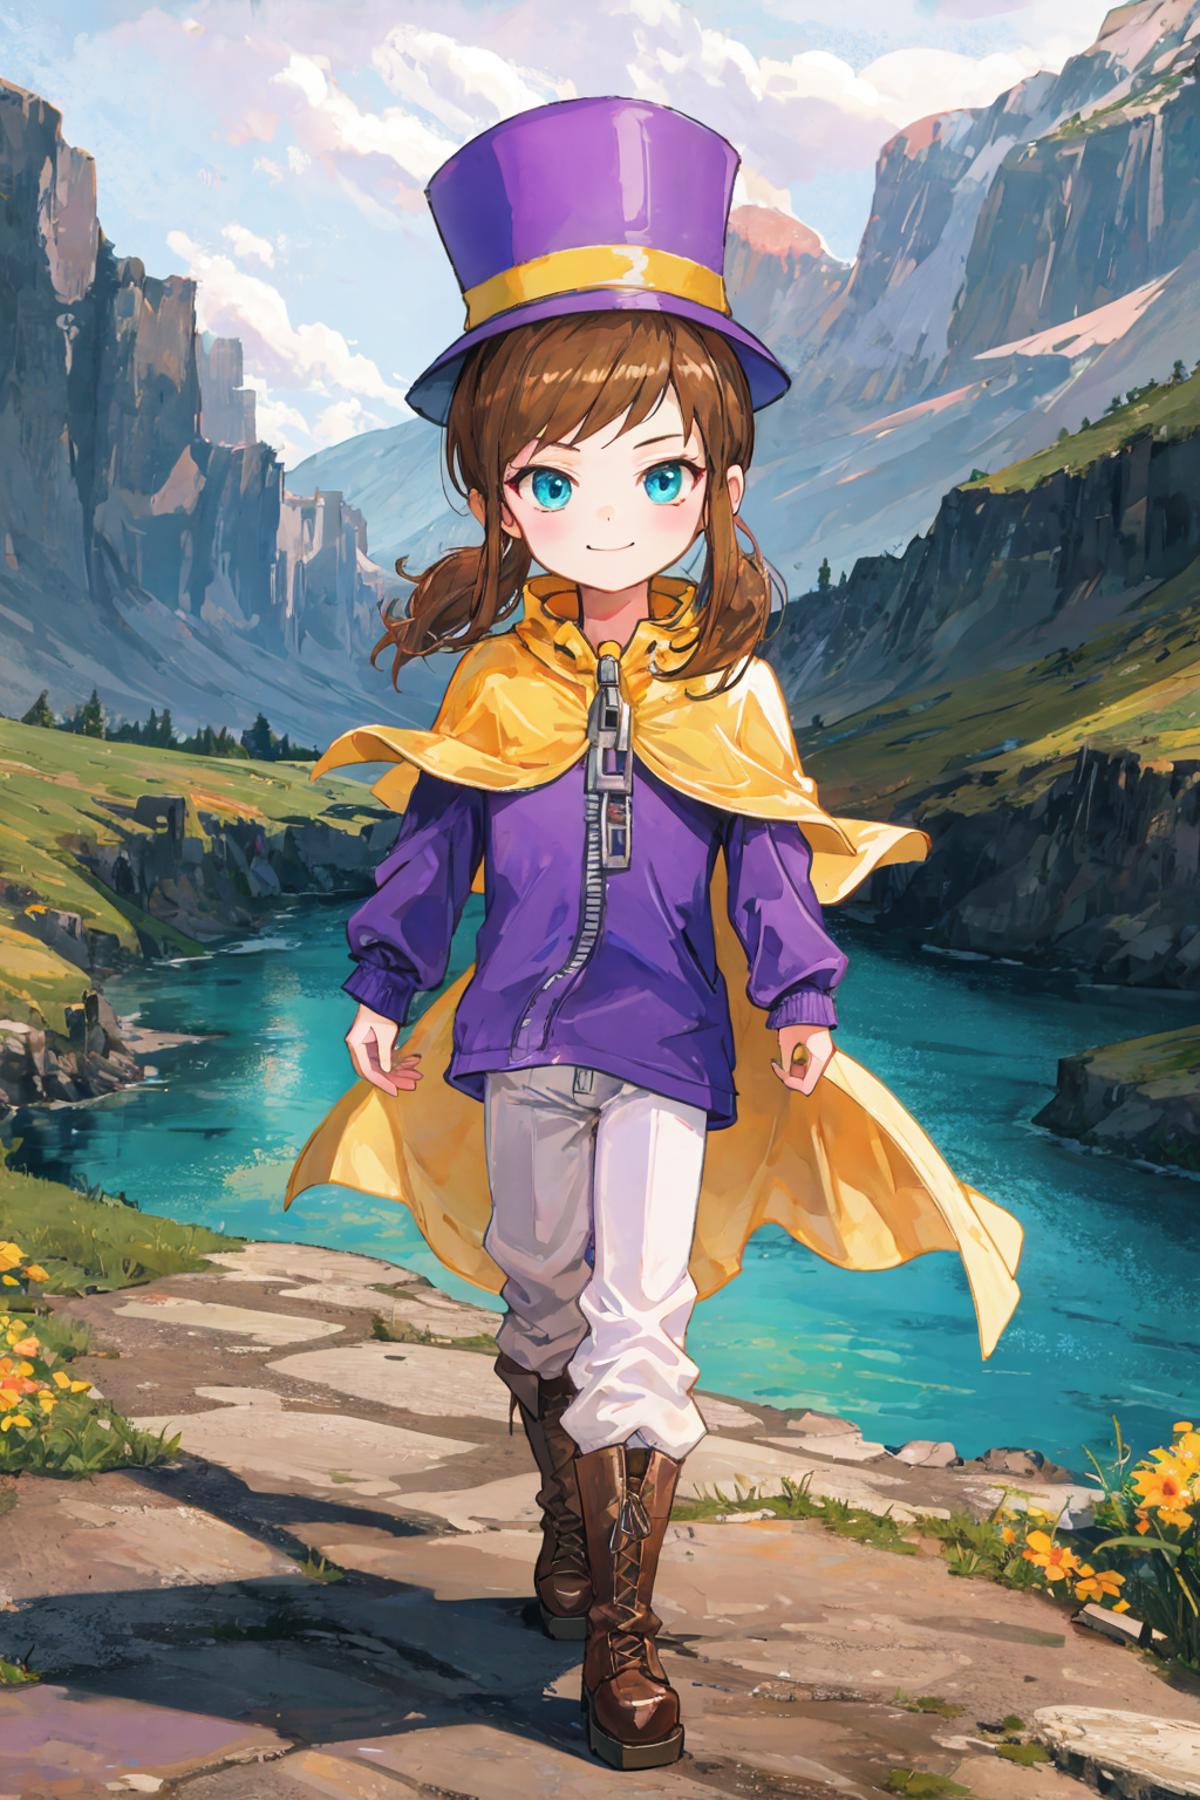 Hat Kid (A Hat In Time) image by Smez